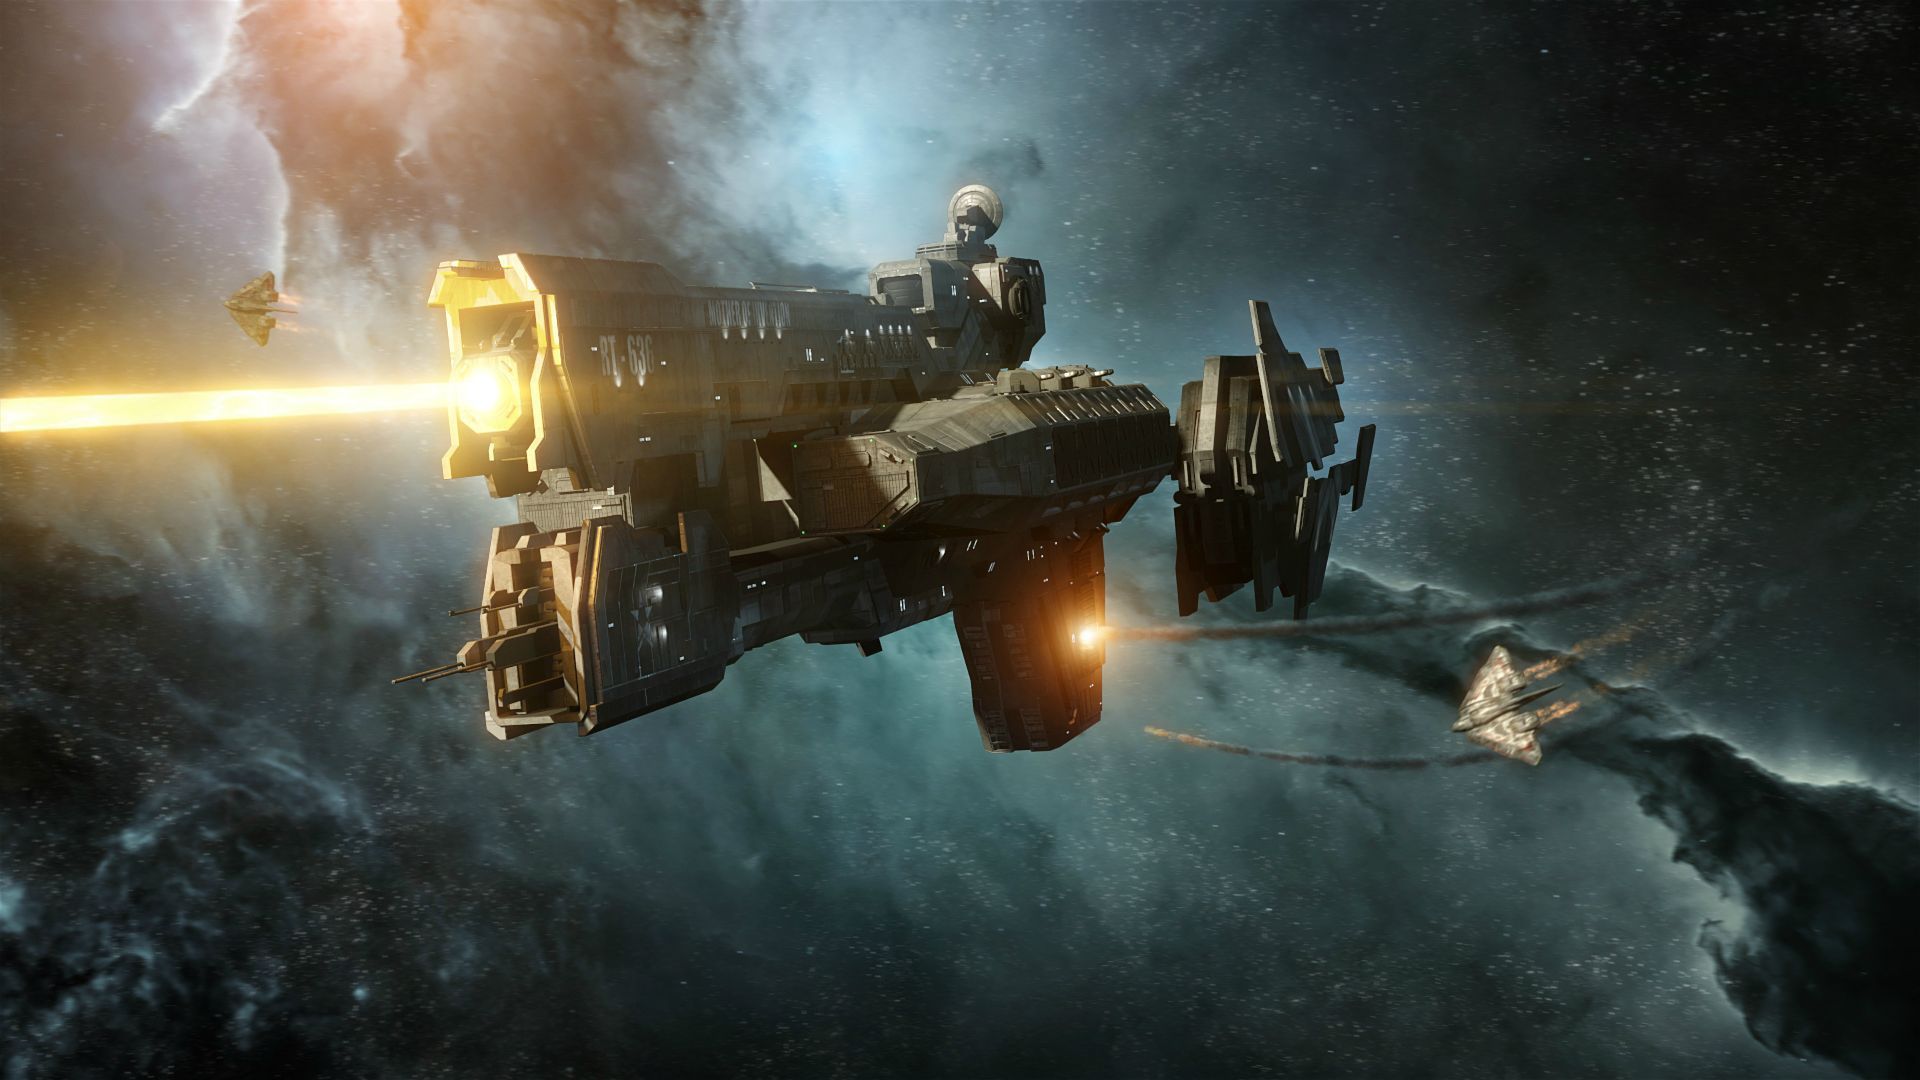 Battleship firing its primary cannon, #spaceopera #scifi inspiration. Space battles, Halo ships, Sci fi wallpaper